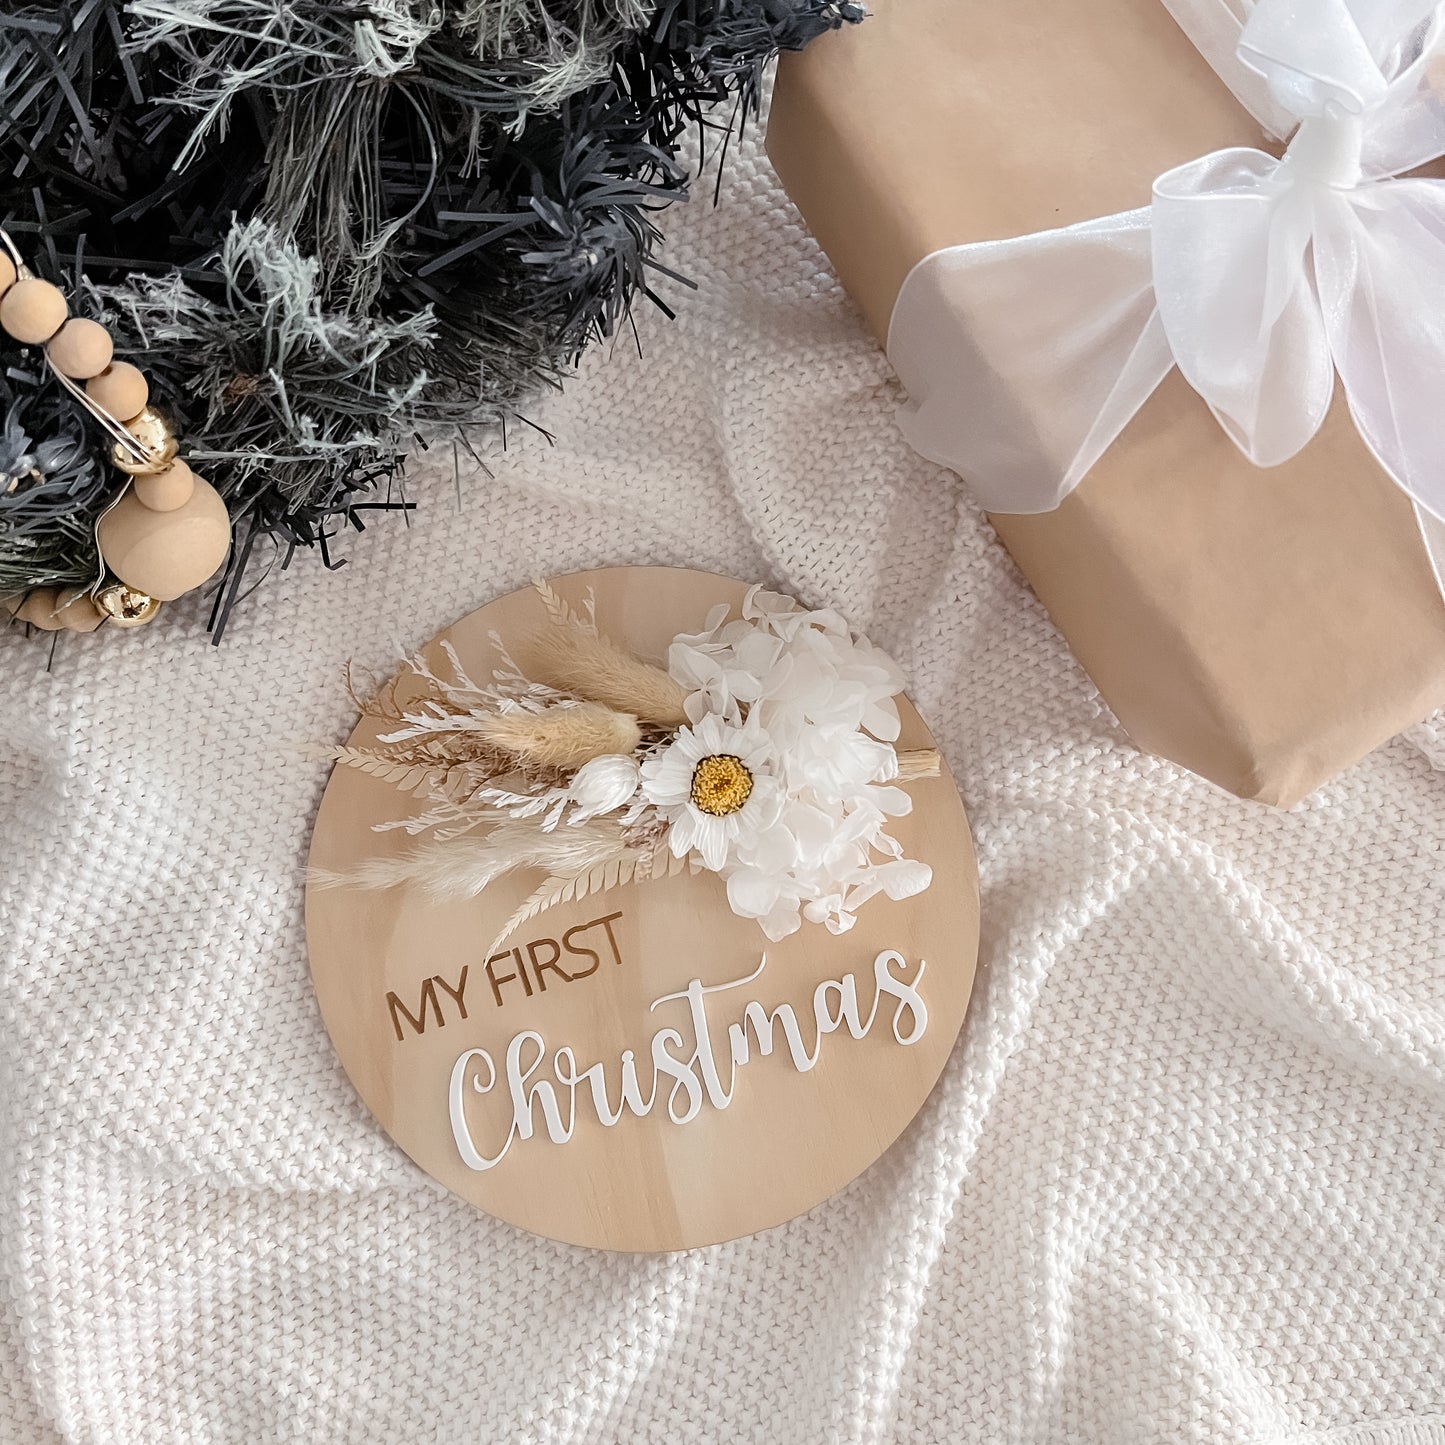 Wooden Christmas Plaque w/ dried florals